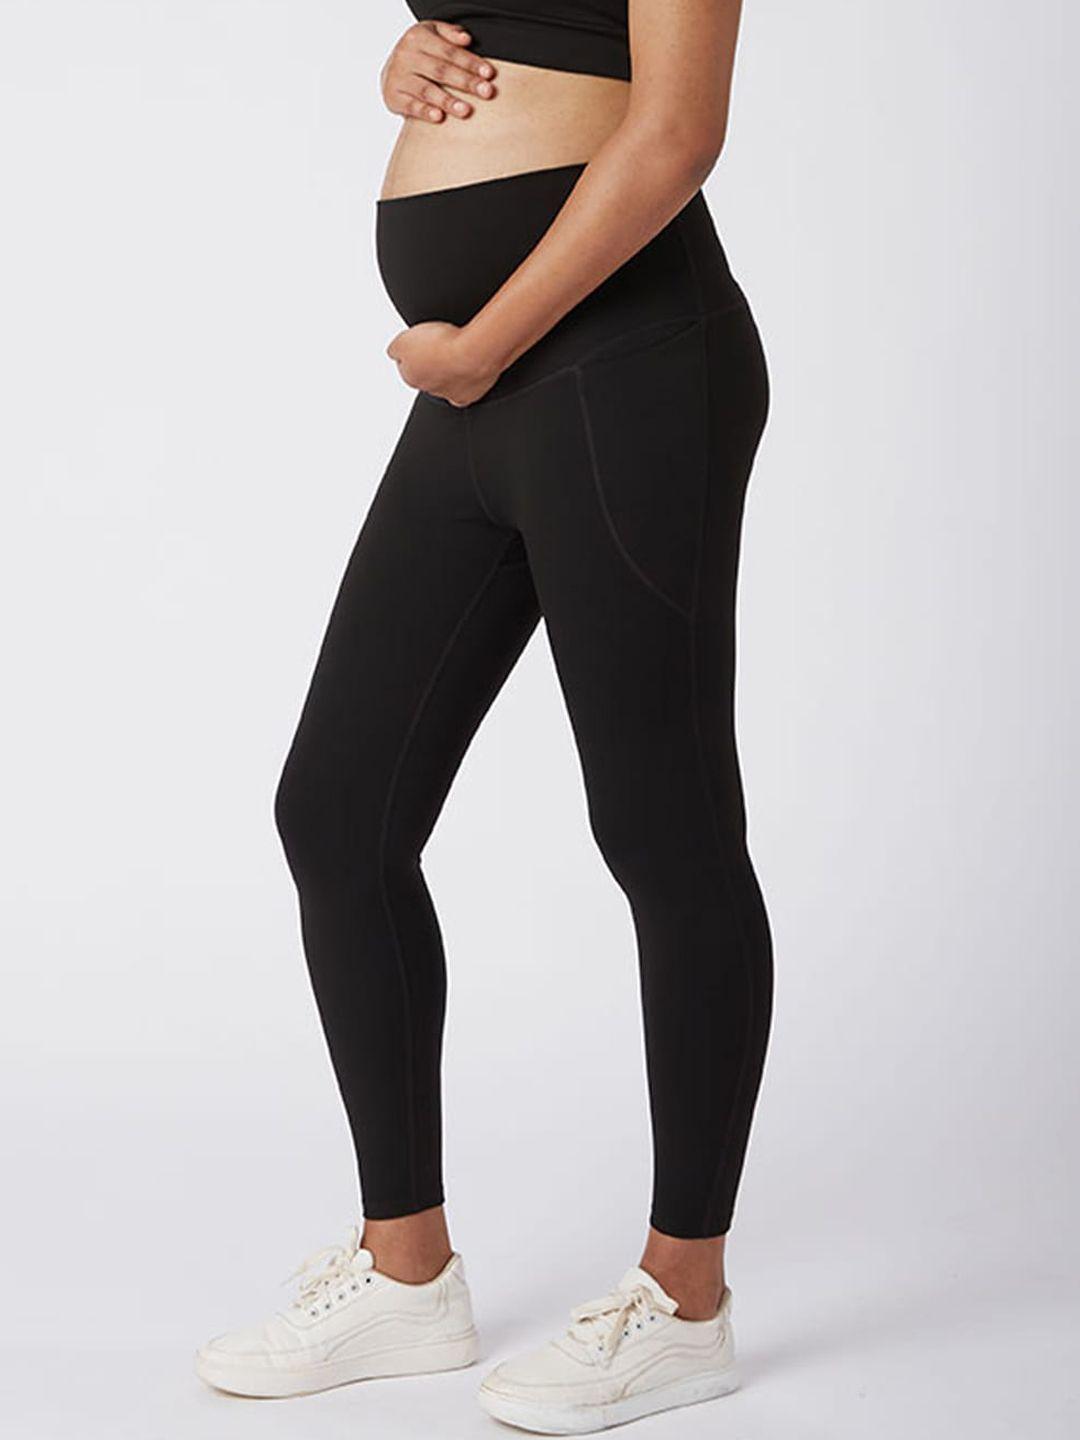 blissclub women black maternity leggings with curved belly panel and 2 pockets